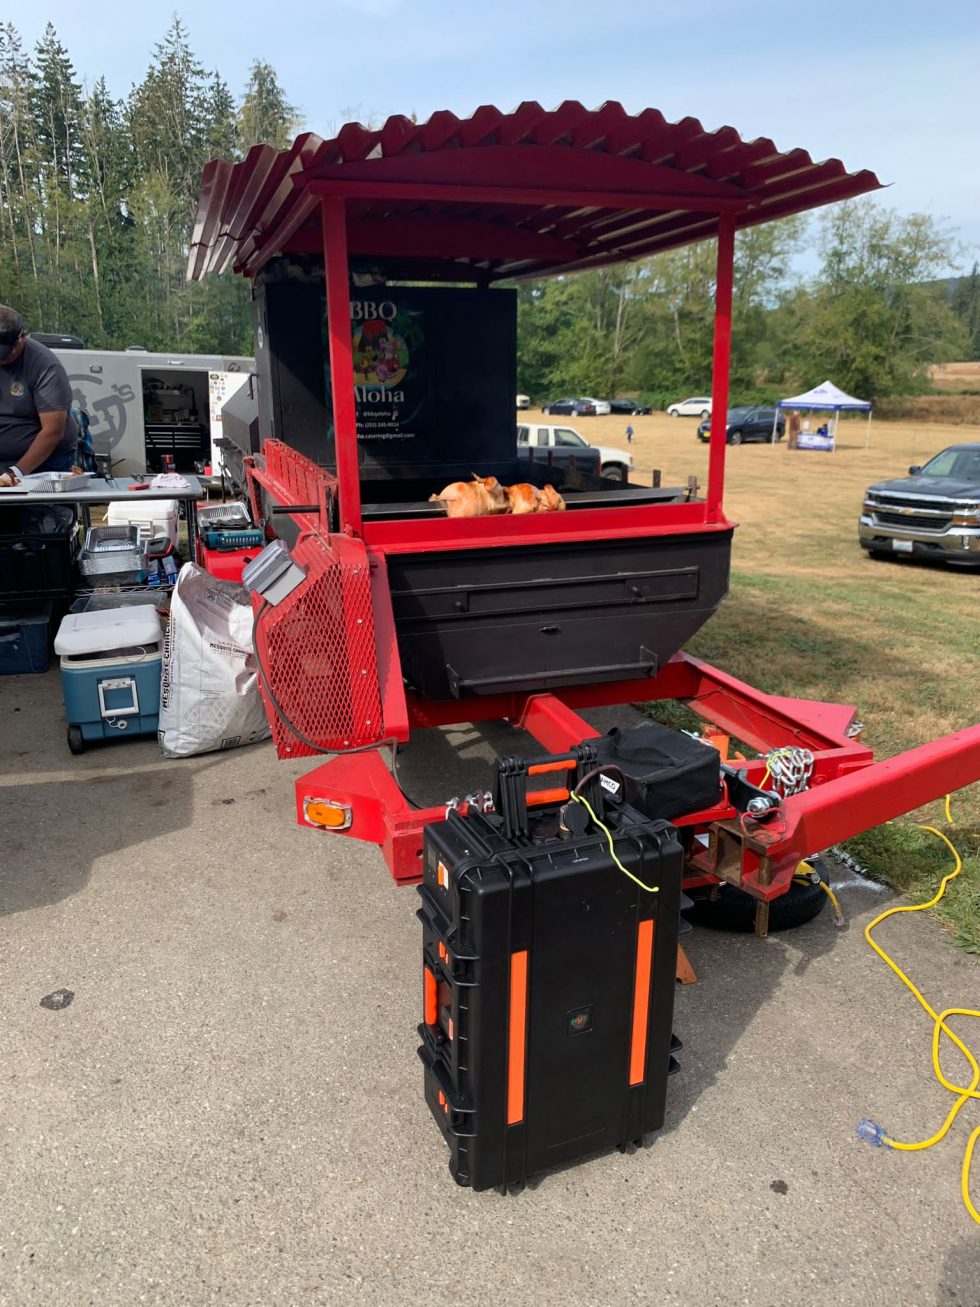 NUE and Camp Korey Collaborate to Install Solar Generators for BBQ Event